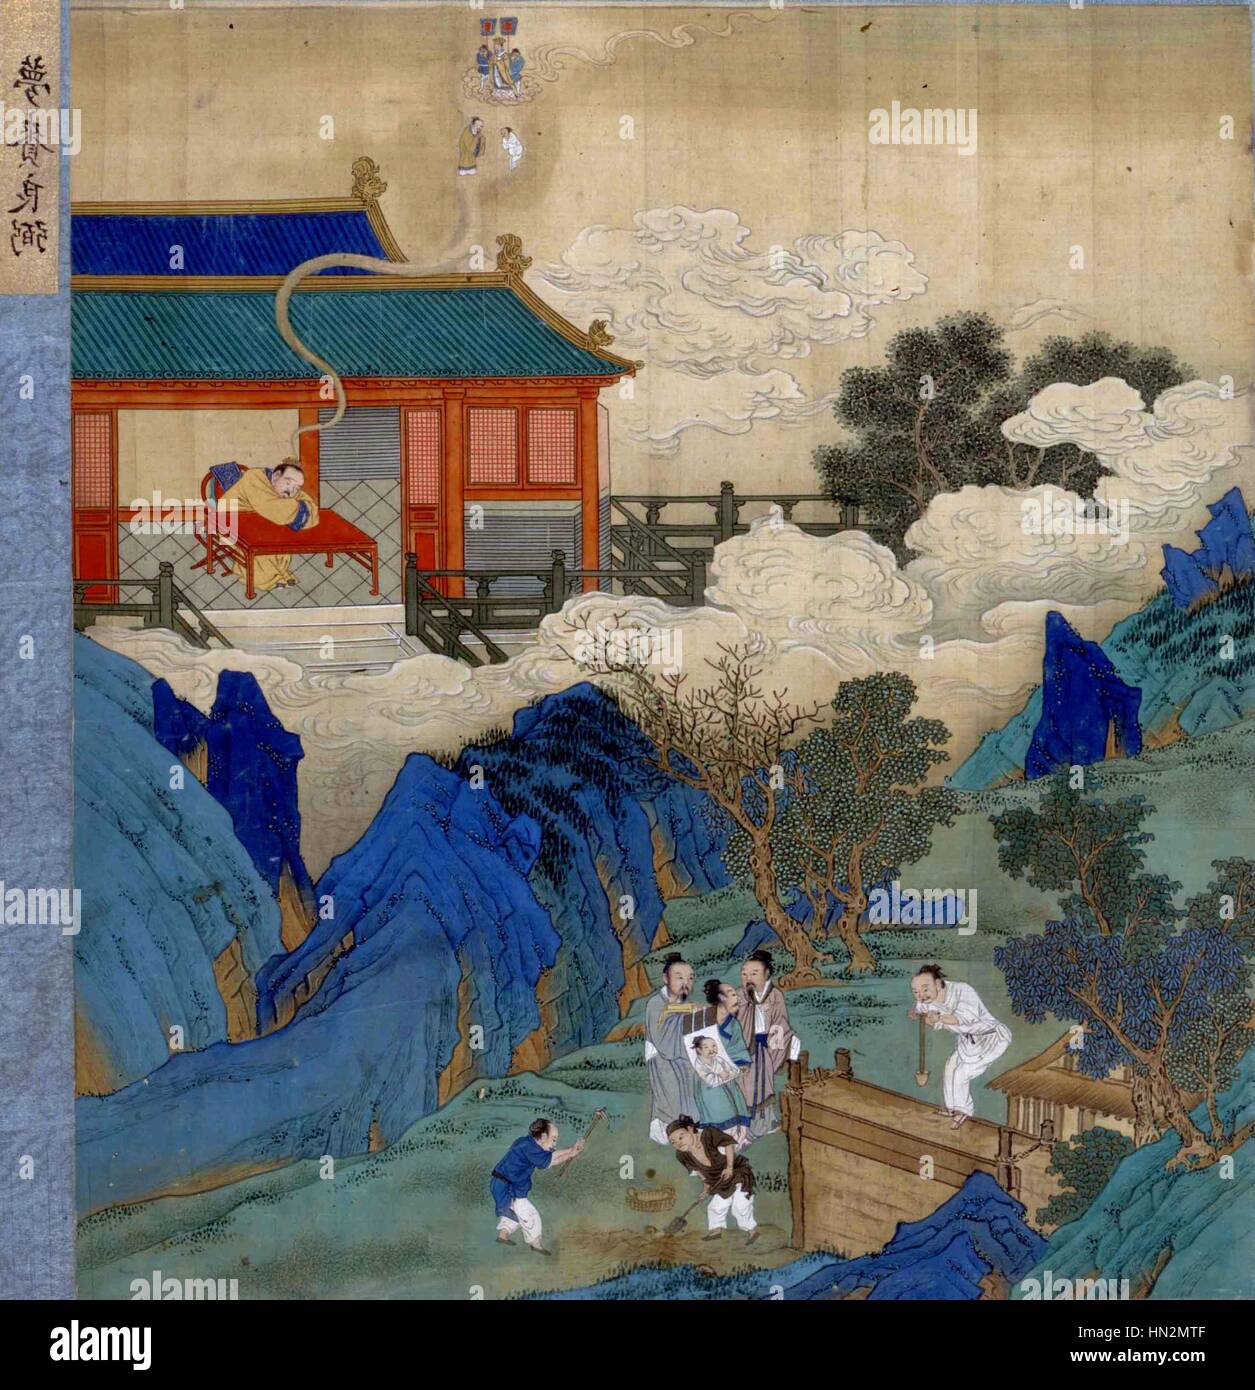 Emperor Kao Tsong's Dream, from the Chang dynasty (he had a dream, in which he saw a person who could be helpful to govern his empire). Mid 17th century China Paris. Bibliotheque nationale Stock Photo